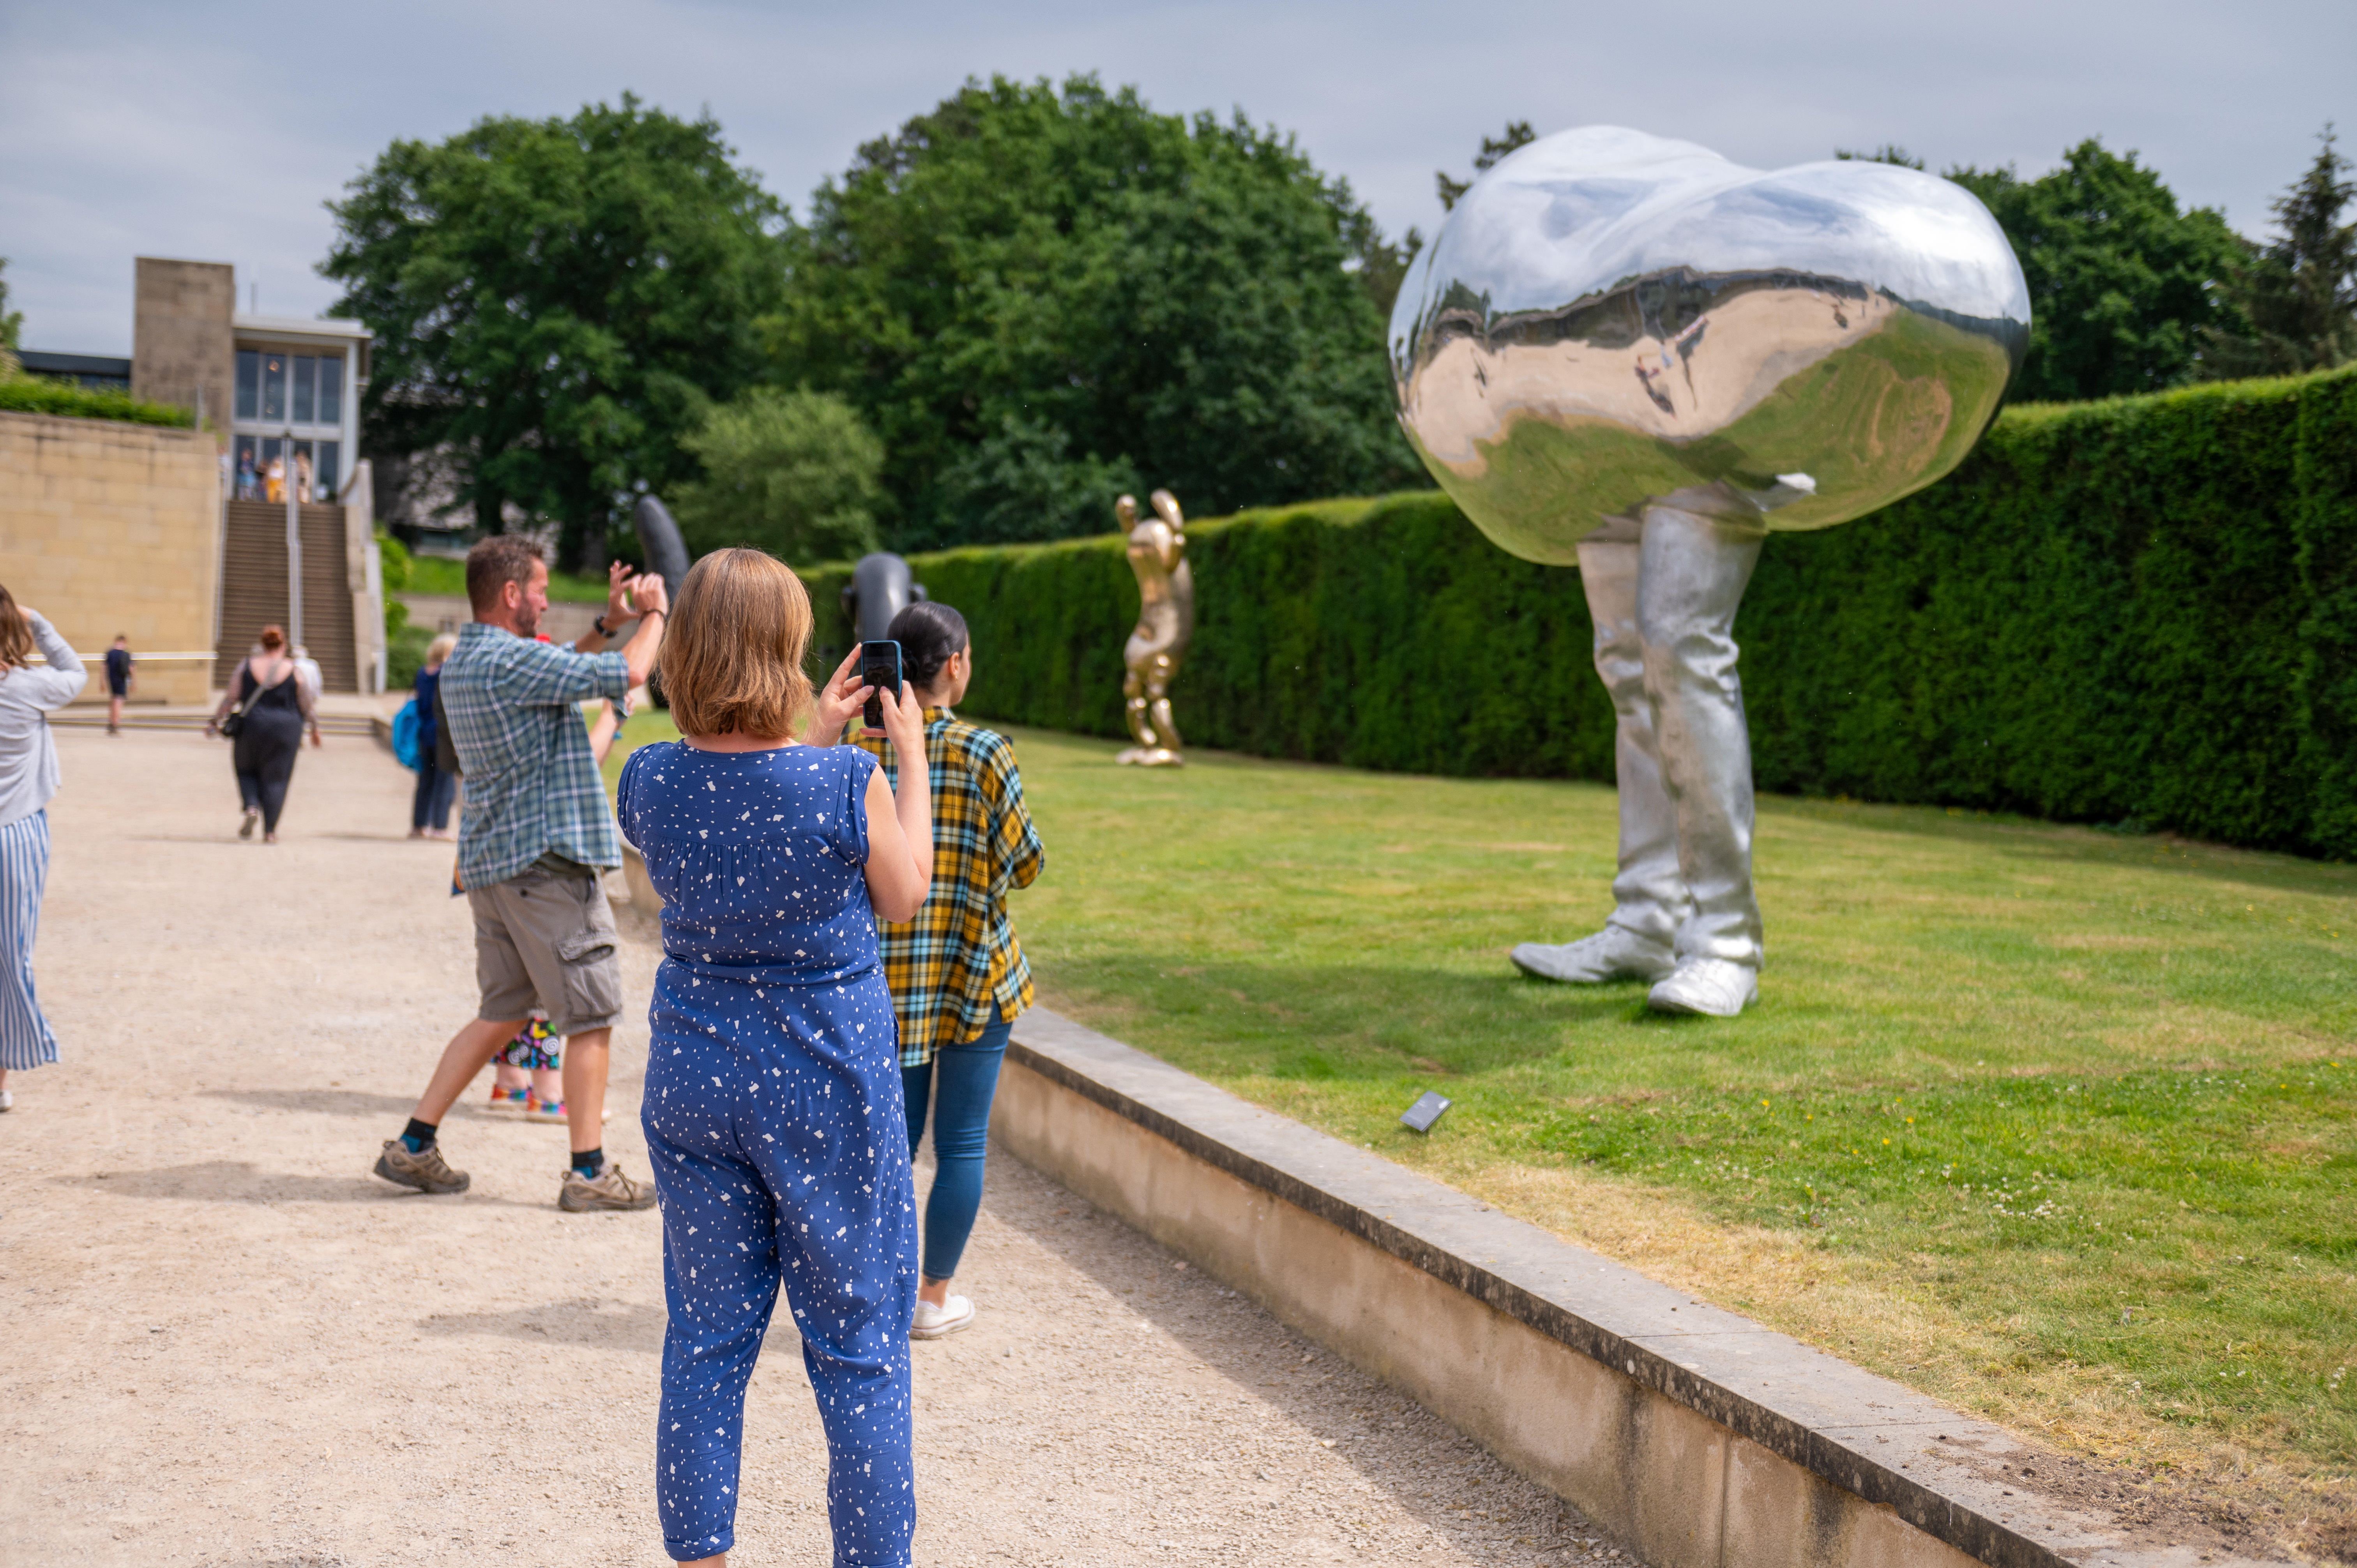 A group of people taking photographs of an oval silver sculpture with legs.